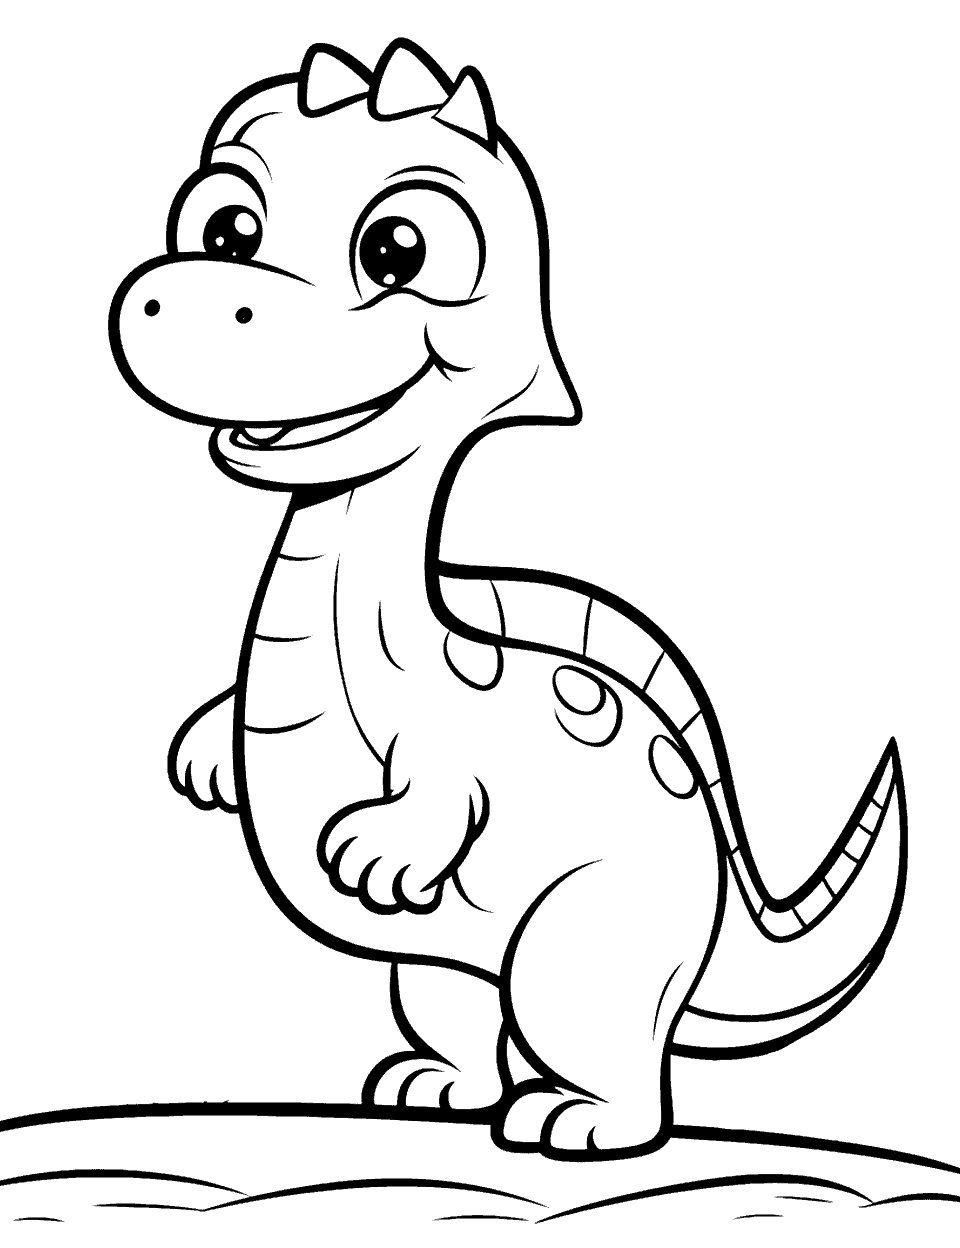 Dinosaur Discovery Coloring Page - An easy-to-color dinosaur with a happy expression.